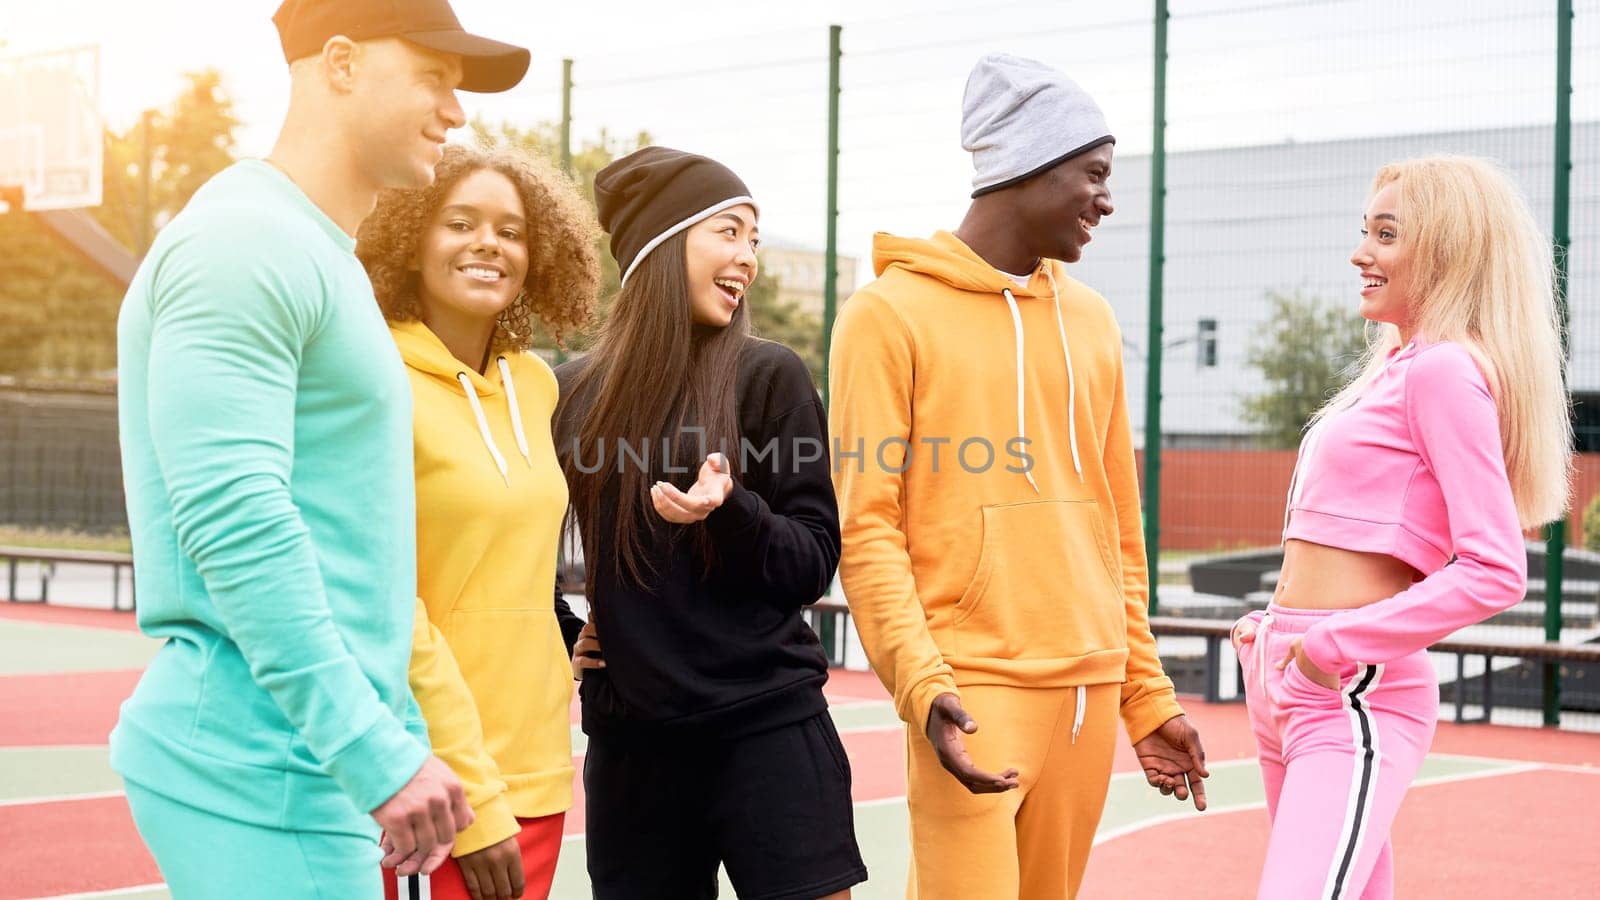 Group of young sportspeople of different nationalities in colorful sportswear talking at university stadium. Multi-ethnic group teenage friends spending time together at sportsground.